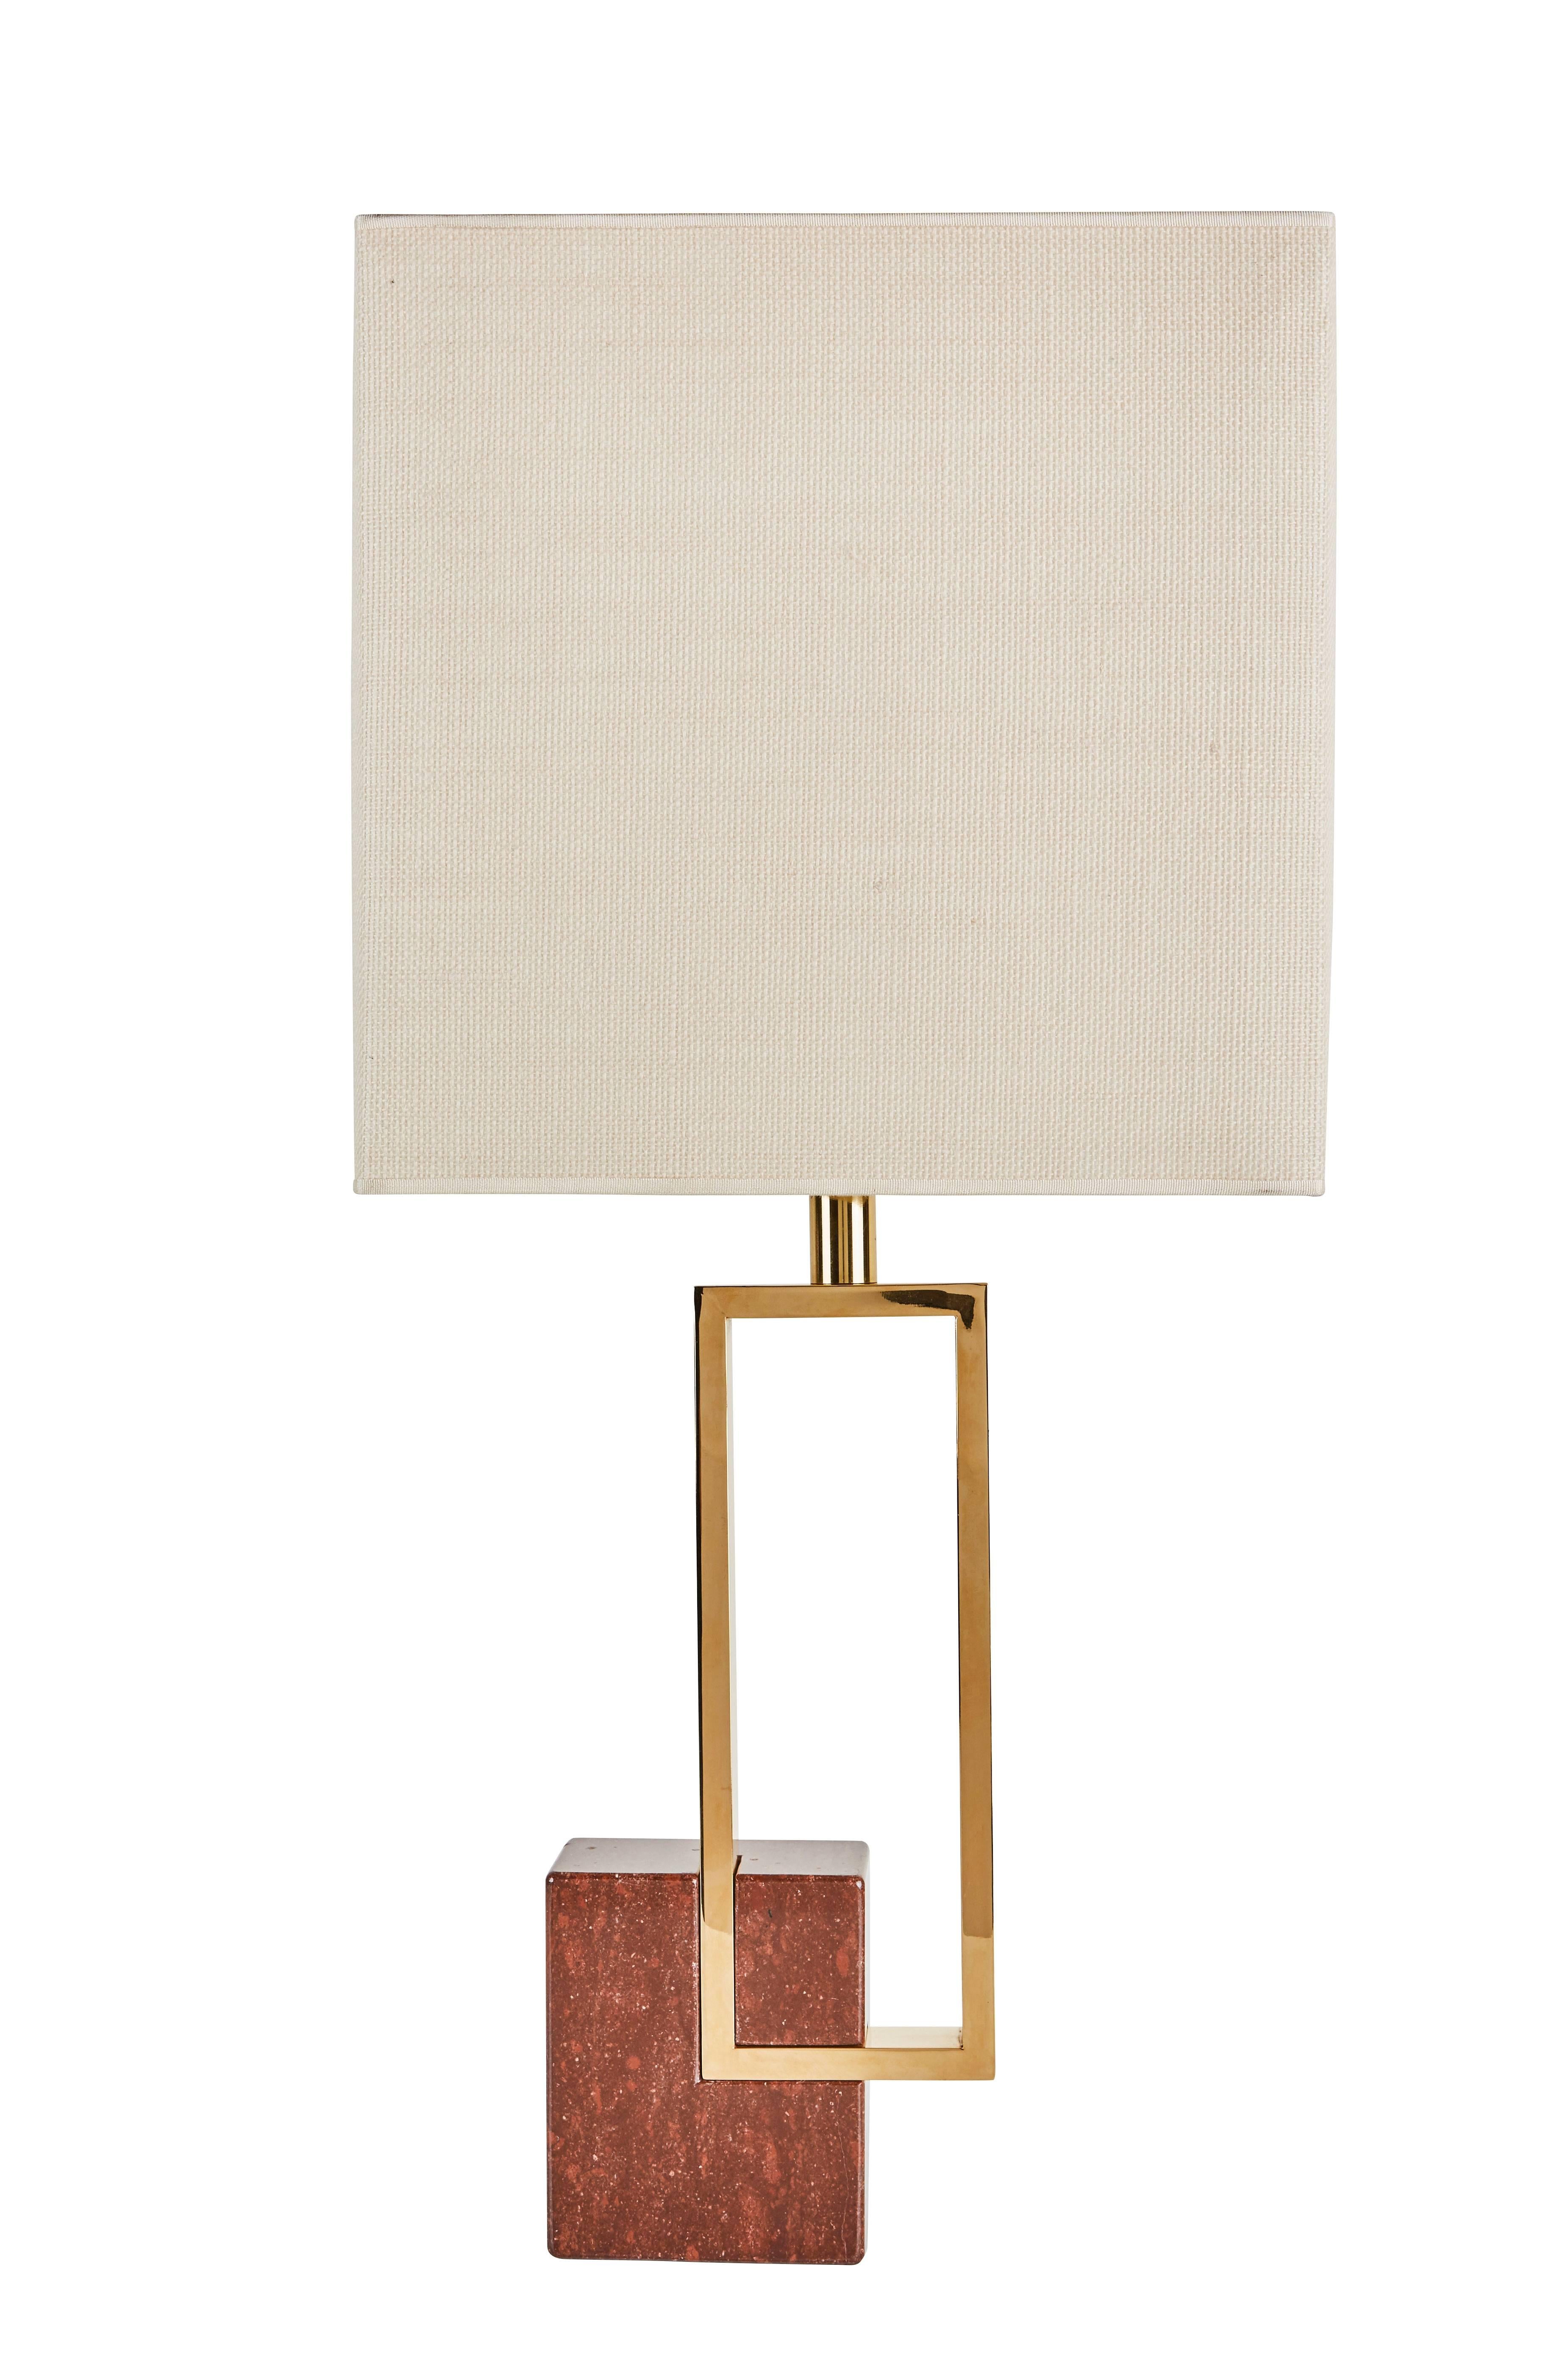 Pair of table lamps designed by Banci Firenze in Italy, circa 1970s. Marble and brass base with original burlap shades. Wired for US sockets. Each table lamp takes one E27 75w maximum bulb.